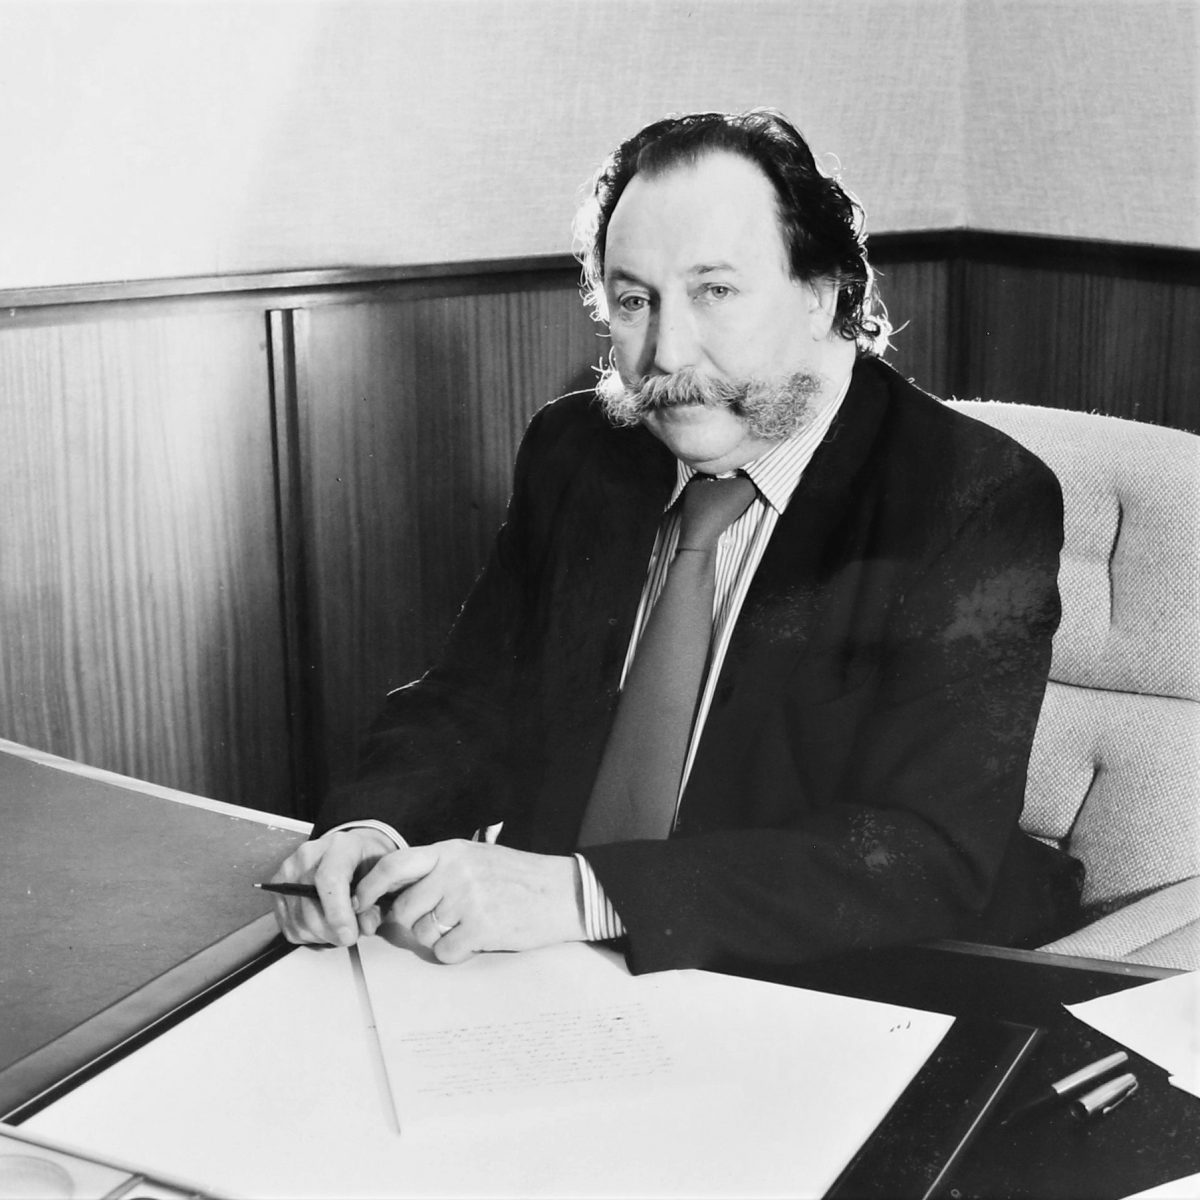 Black and white photograph of an older white male sat at a desk. The desk and person are at an angle to the camera. The man’s dark hair is receding, and he has a handlebar moustache. He is wearing a dark suit, white striped shirt, and a pale tie.